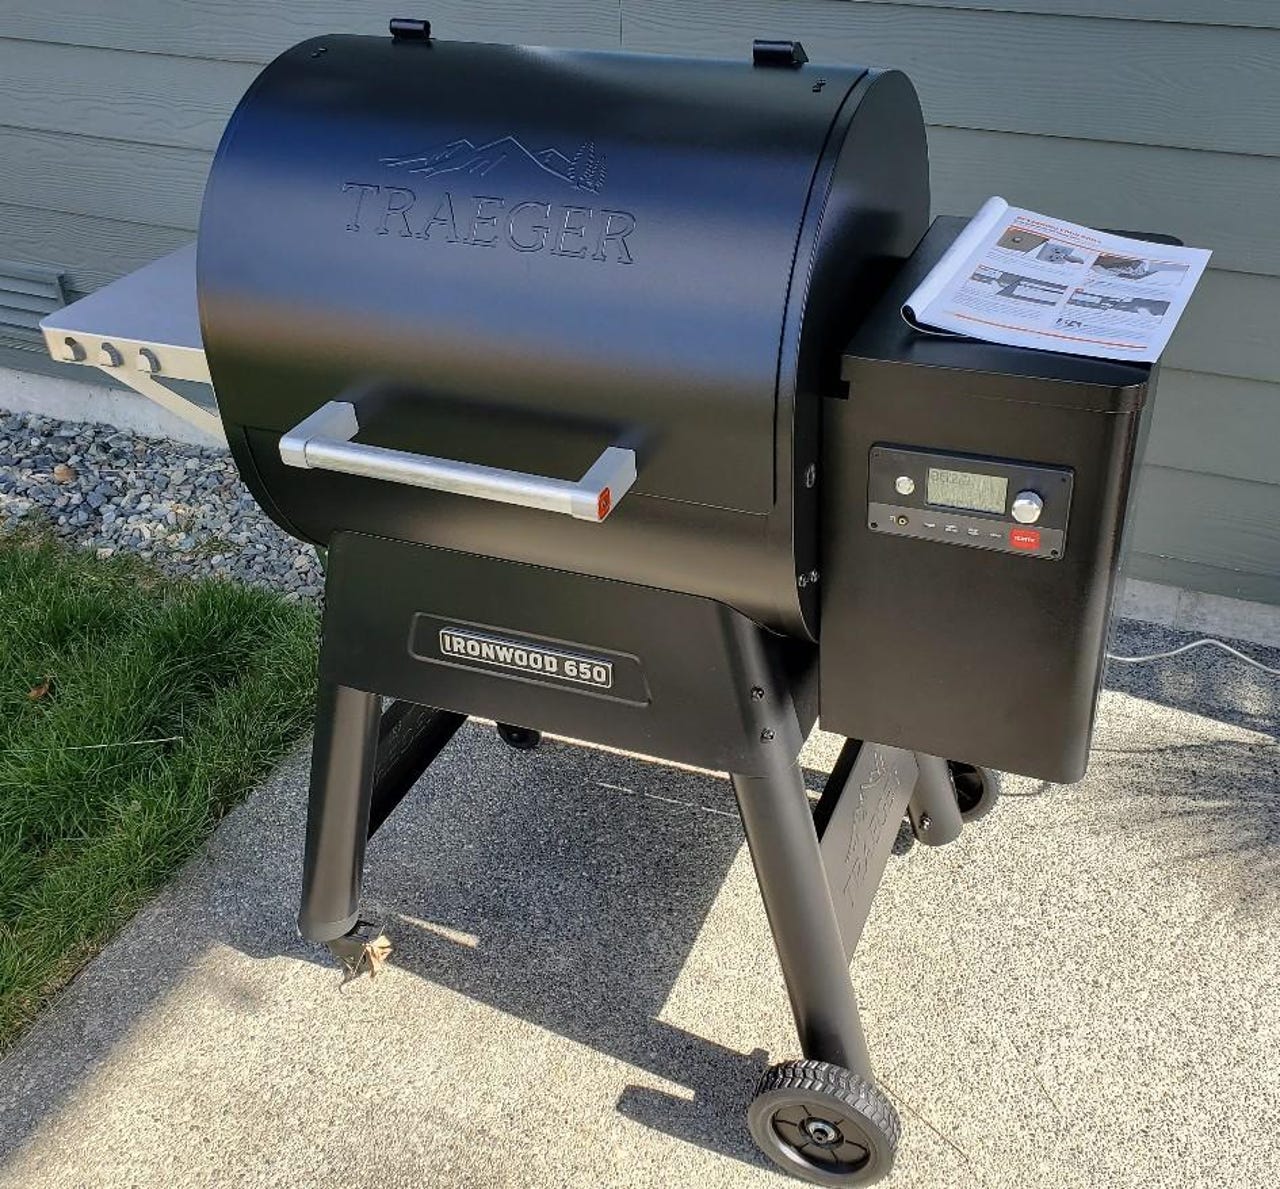 Anyone else own a Traeger here? Need help with cleaning outside of